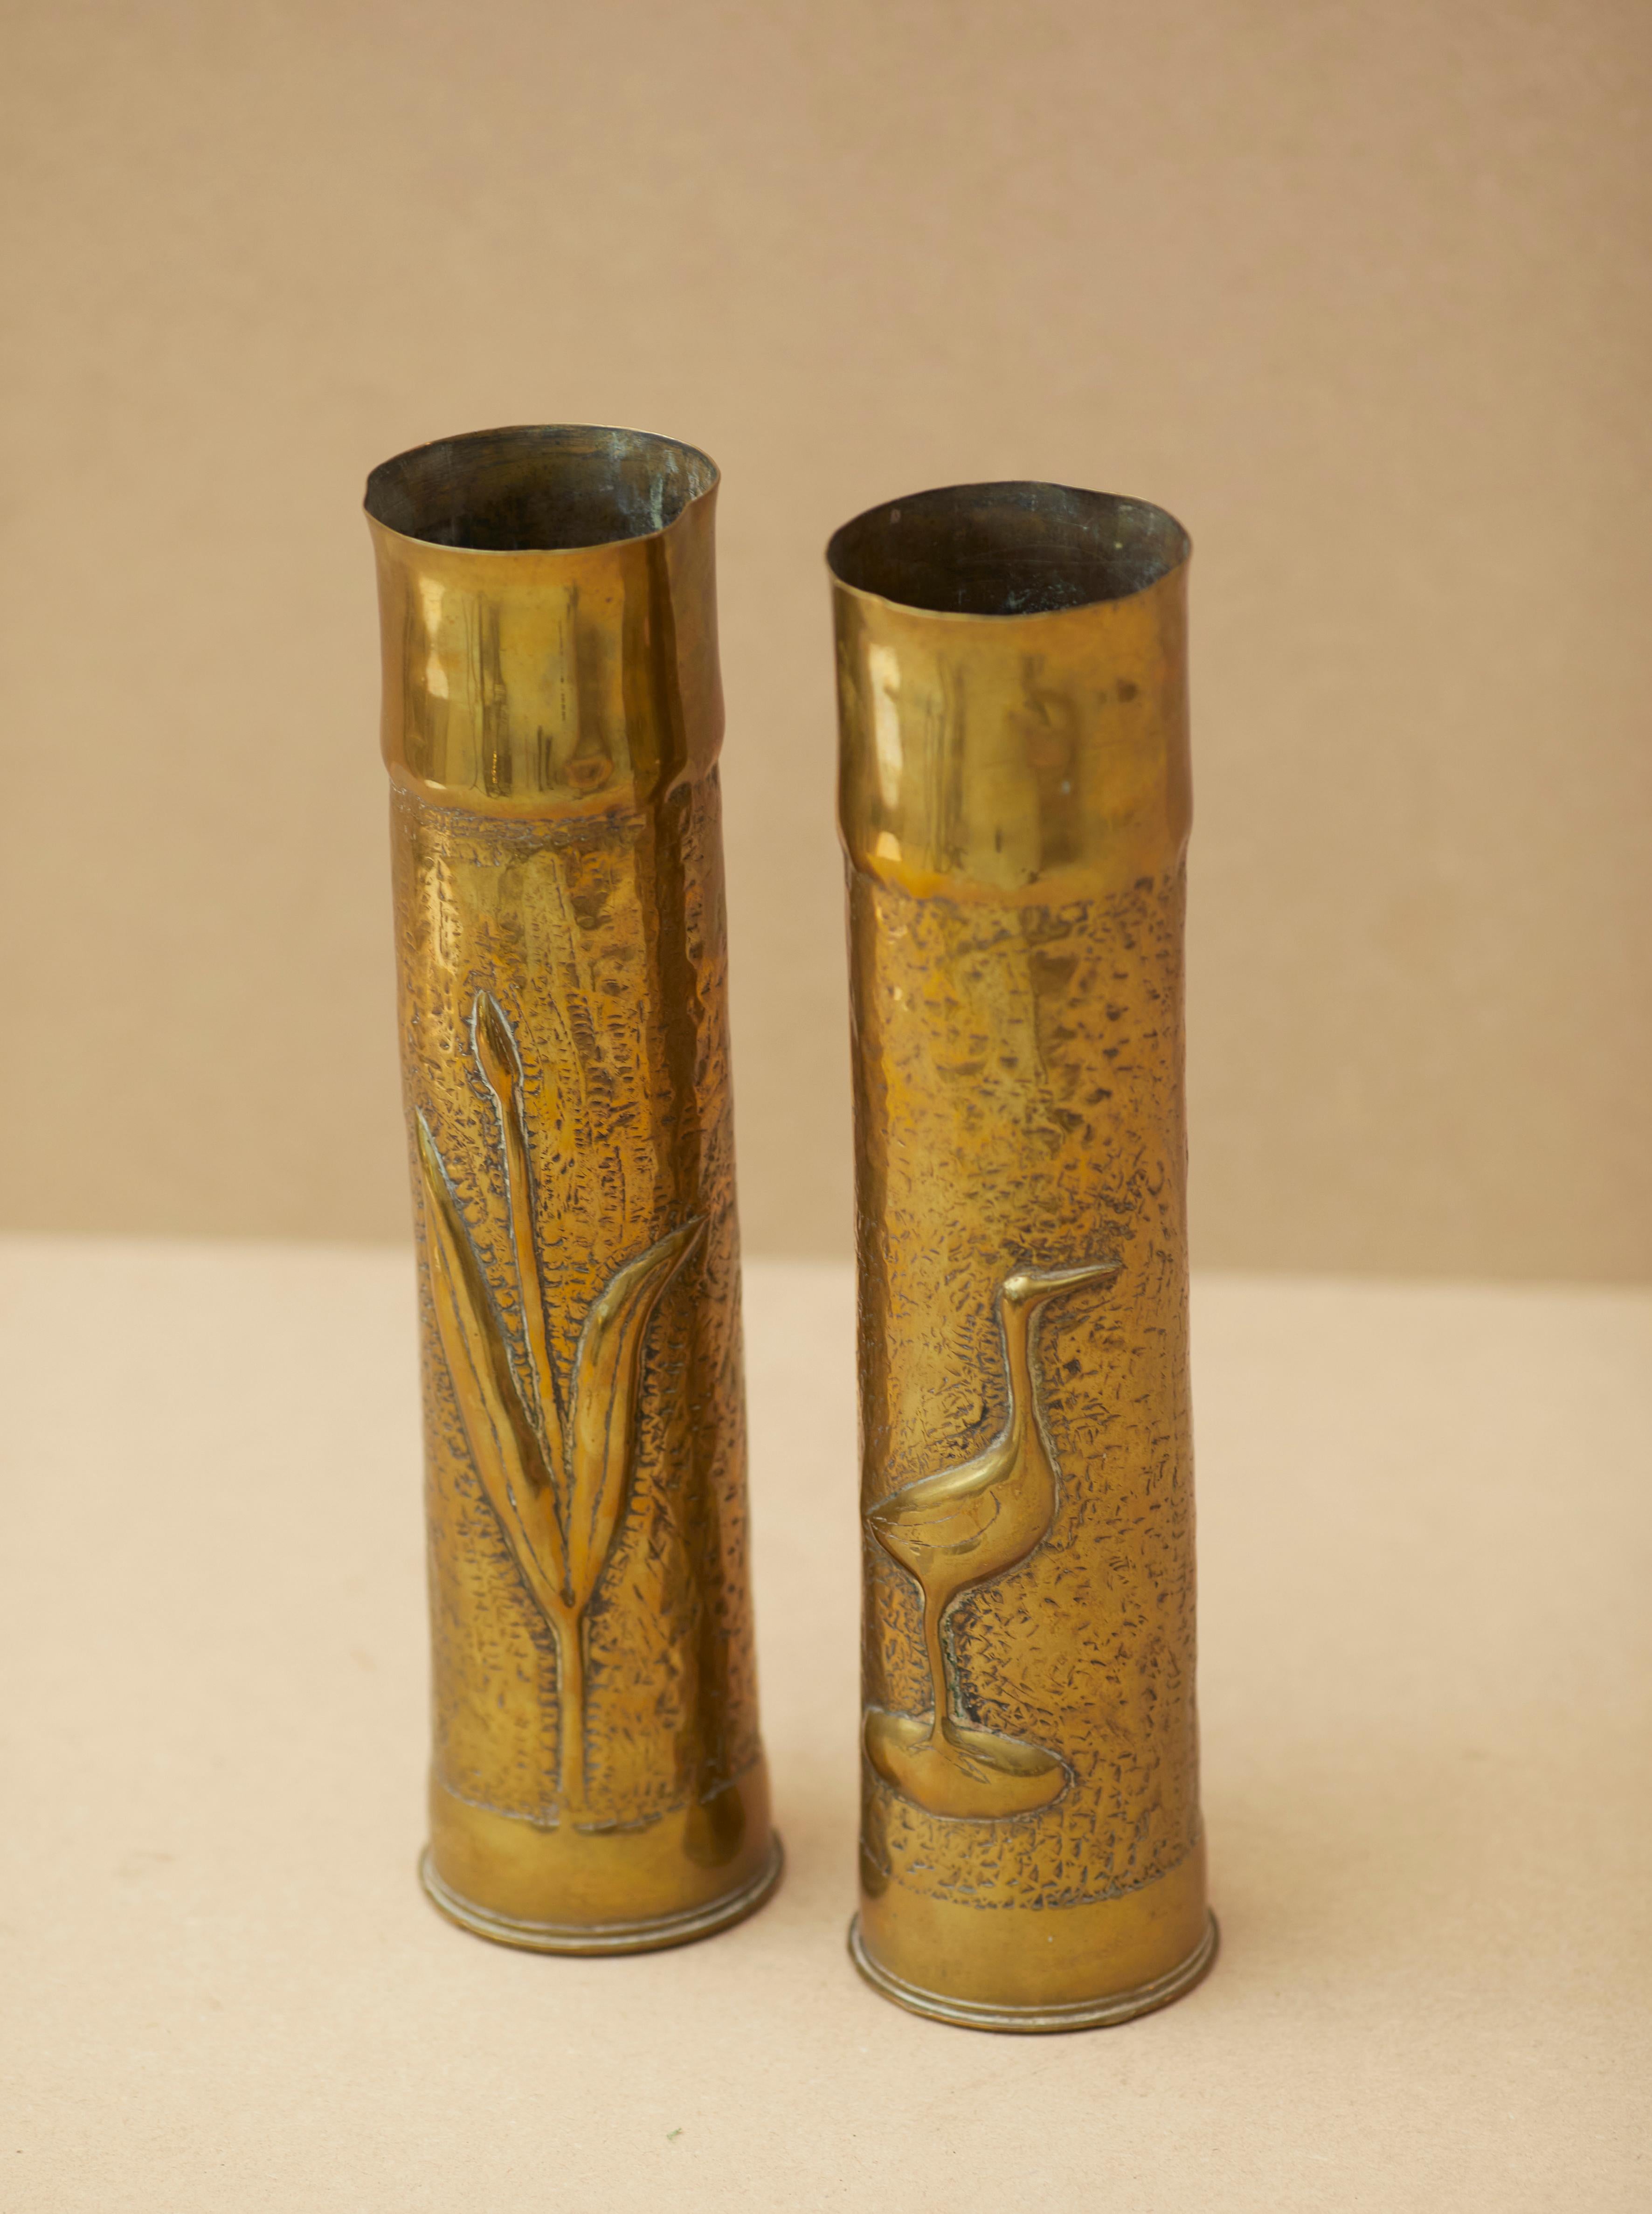 A pair of unique, heavily patinated, hand-crafted historical memorabilia from World War 1, France, between 1914 and 1918.

Trench art (